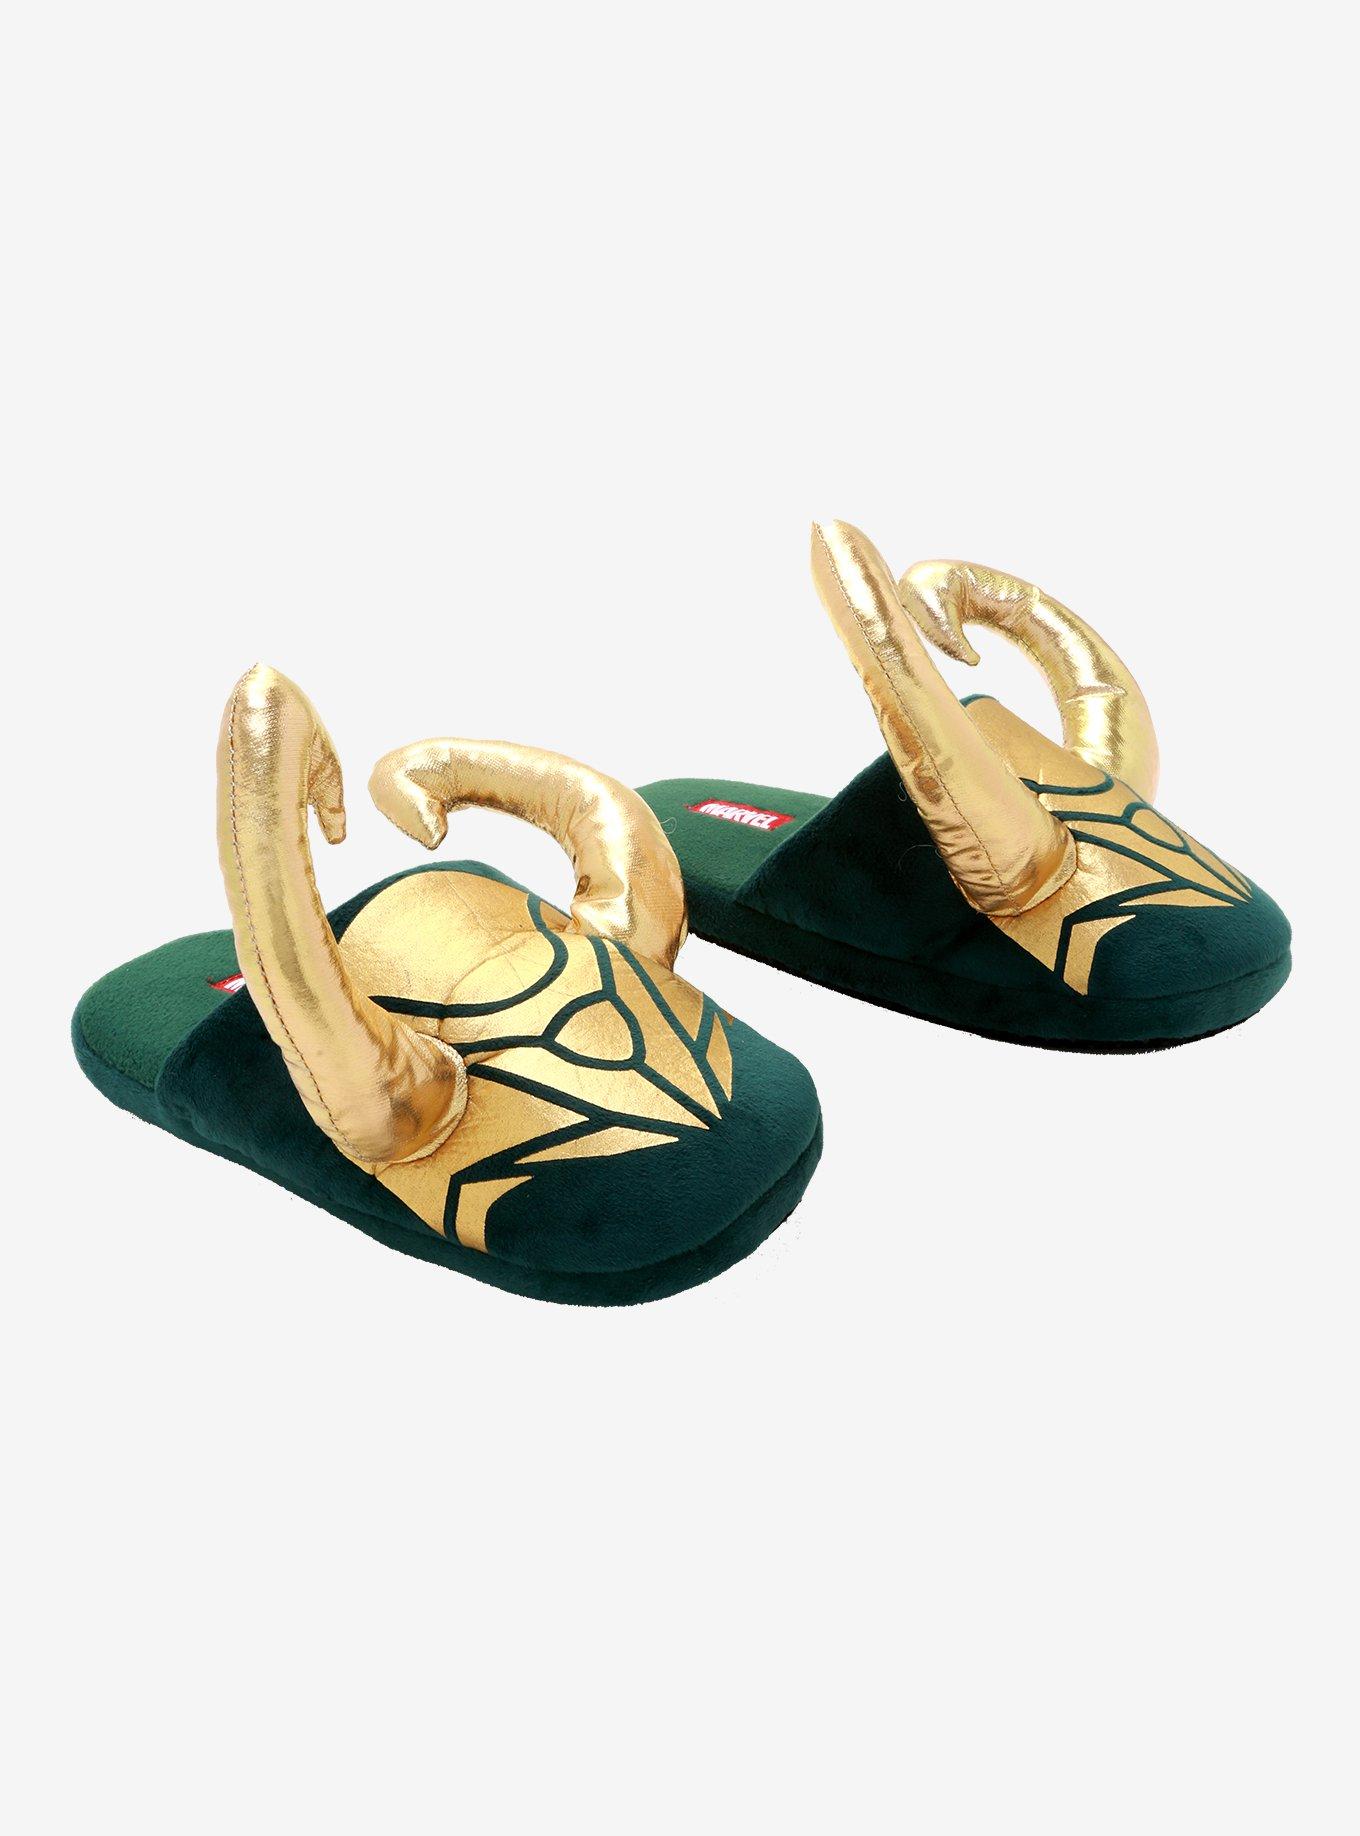 Optø, optø, frost tø Inficere Motley Marvel Loki Plush Slippers | Hot Topic